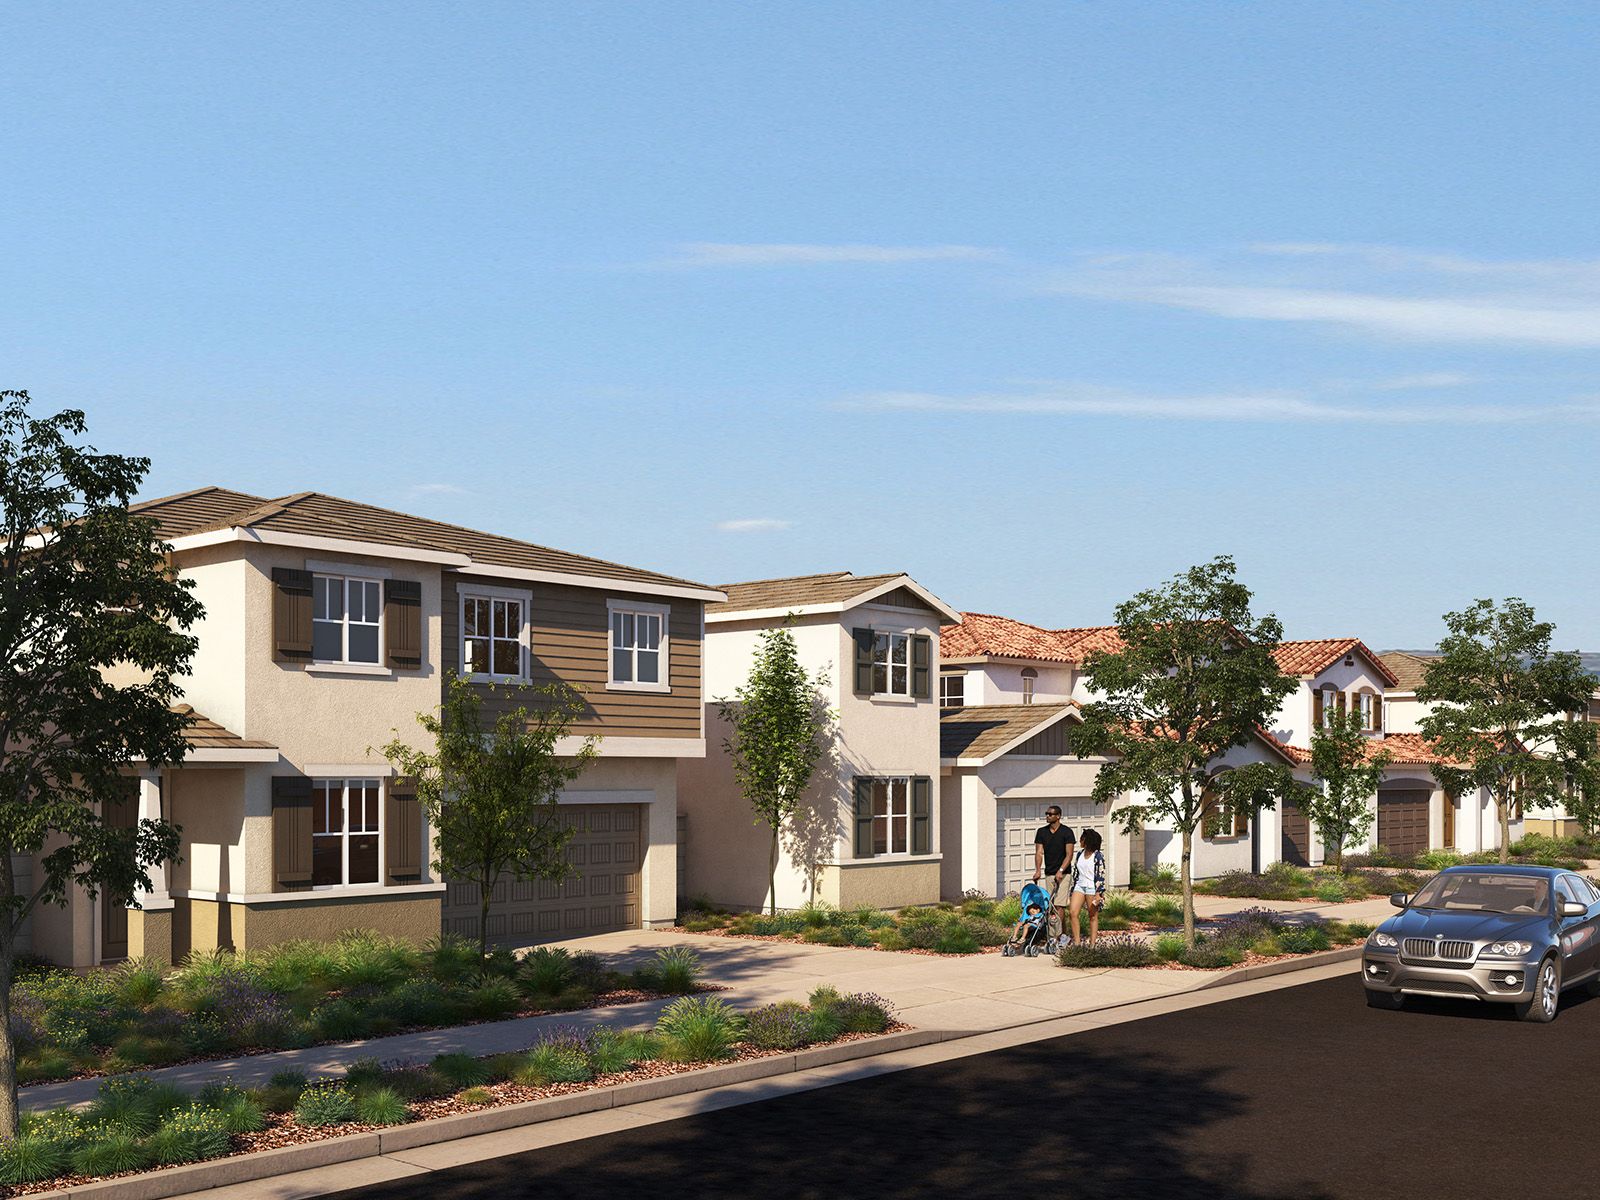 Energy-efficient homes coming soon to Redlands, CA.